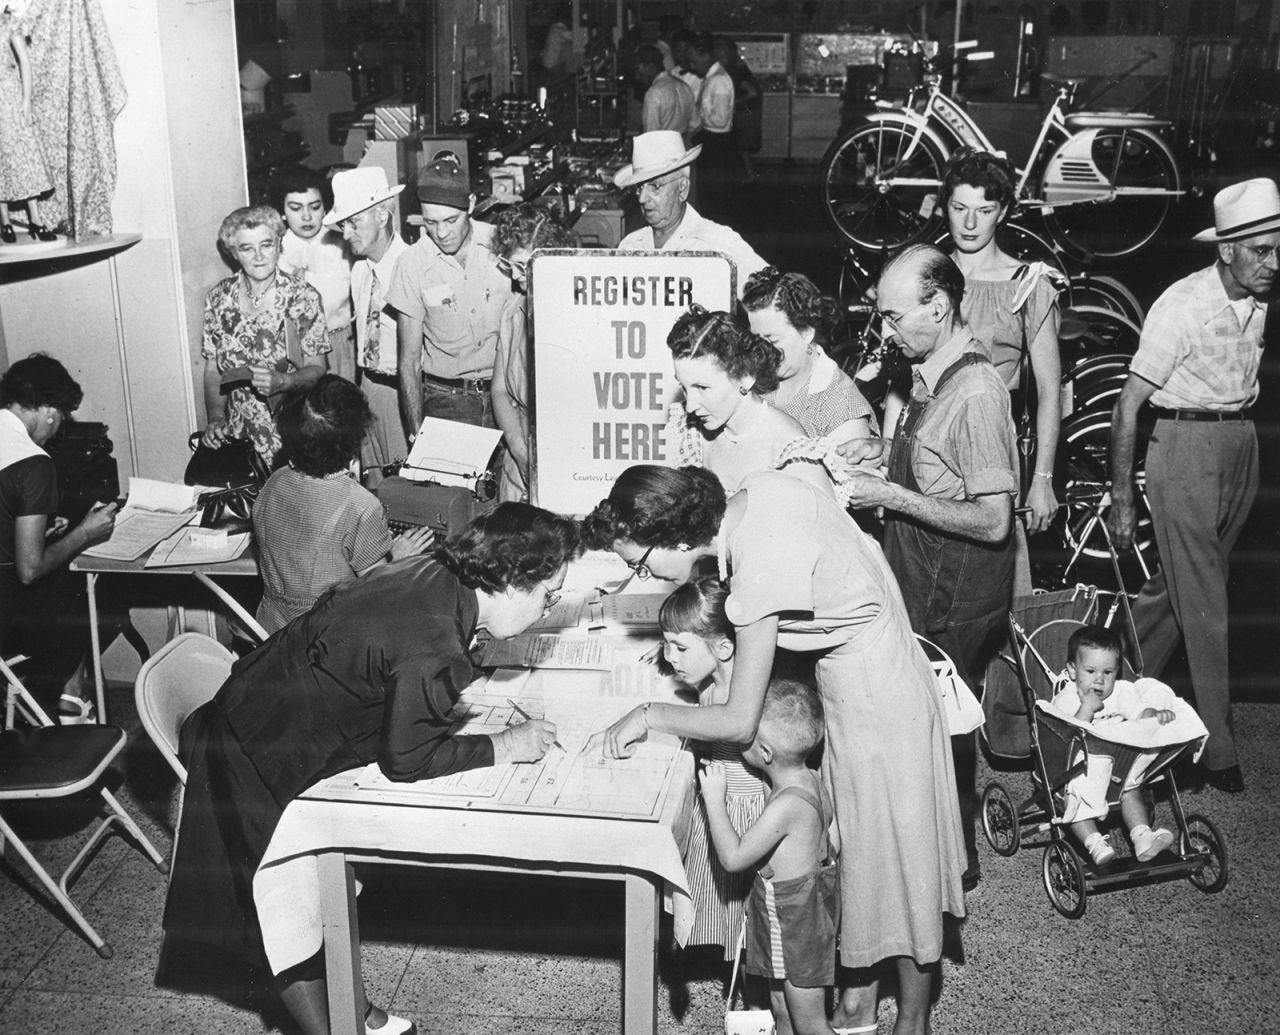 People vote inside a Sears store in Tucson, Arizona, in 1953.